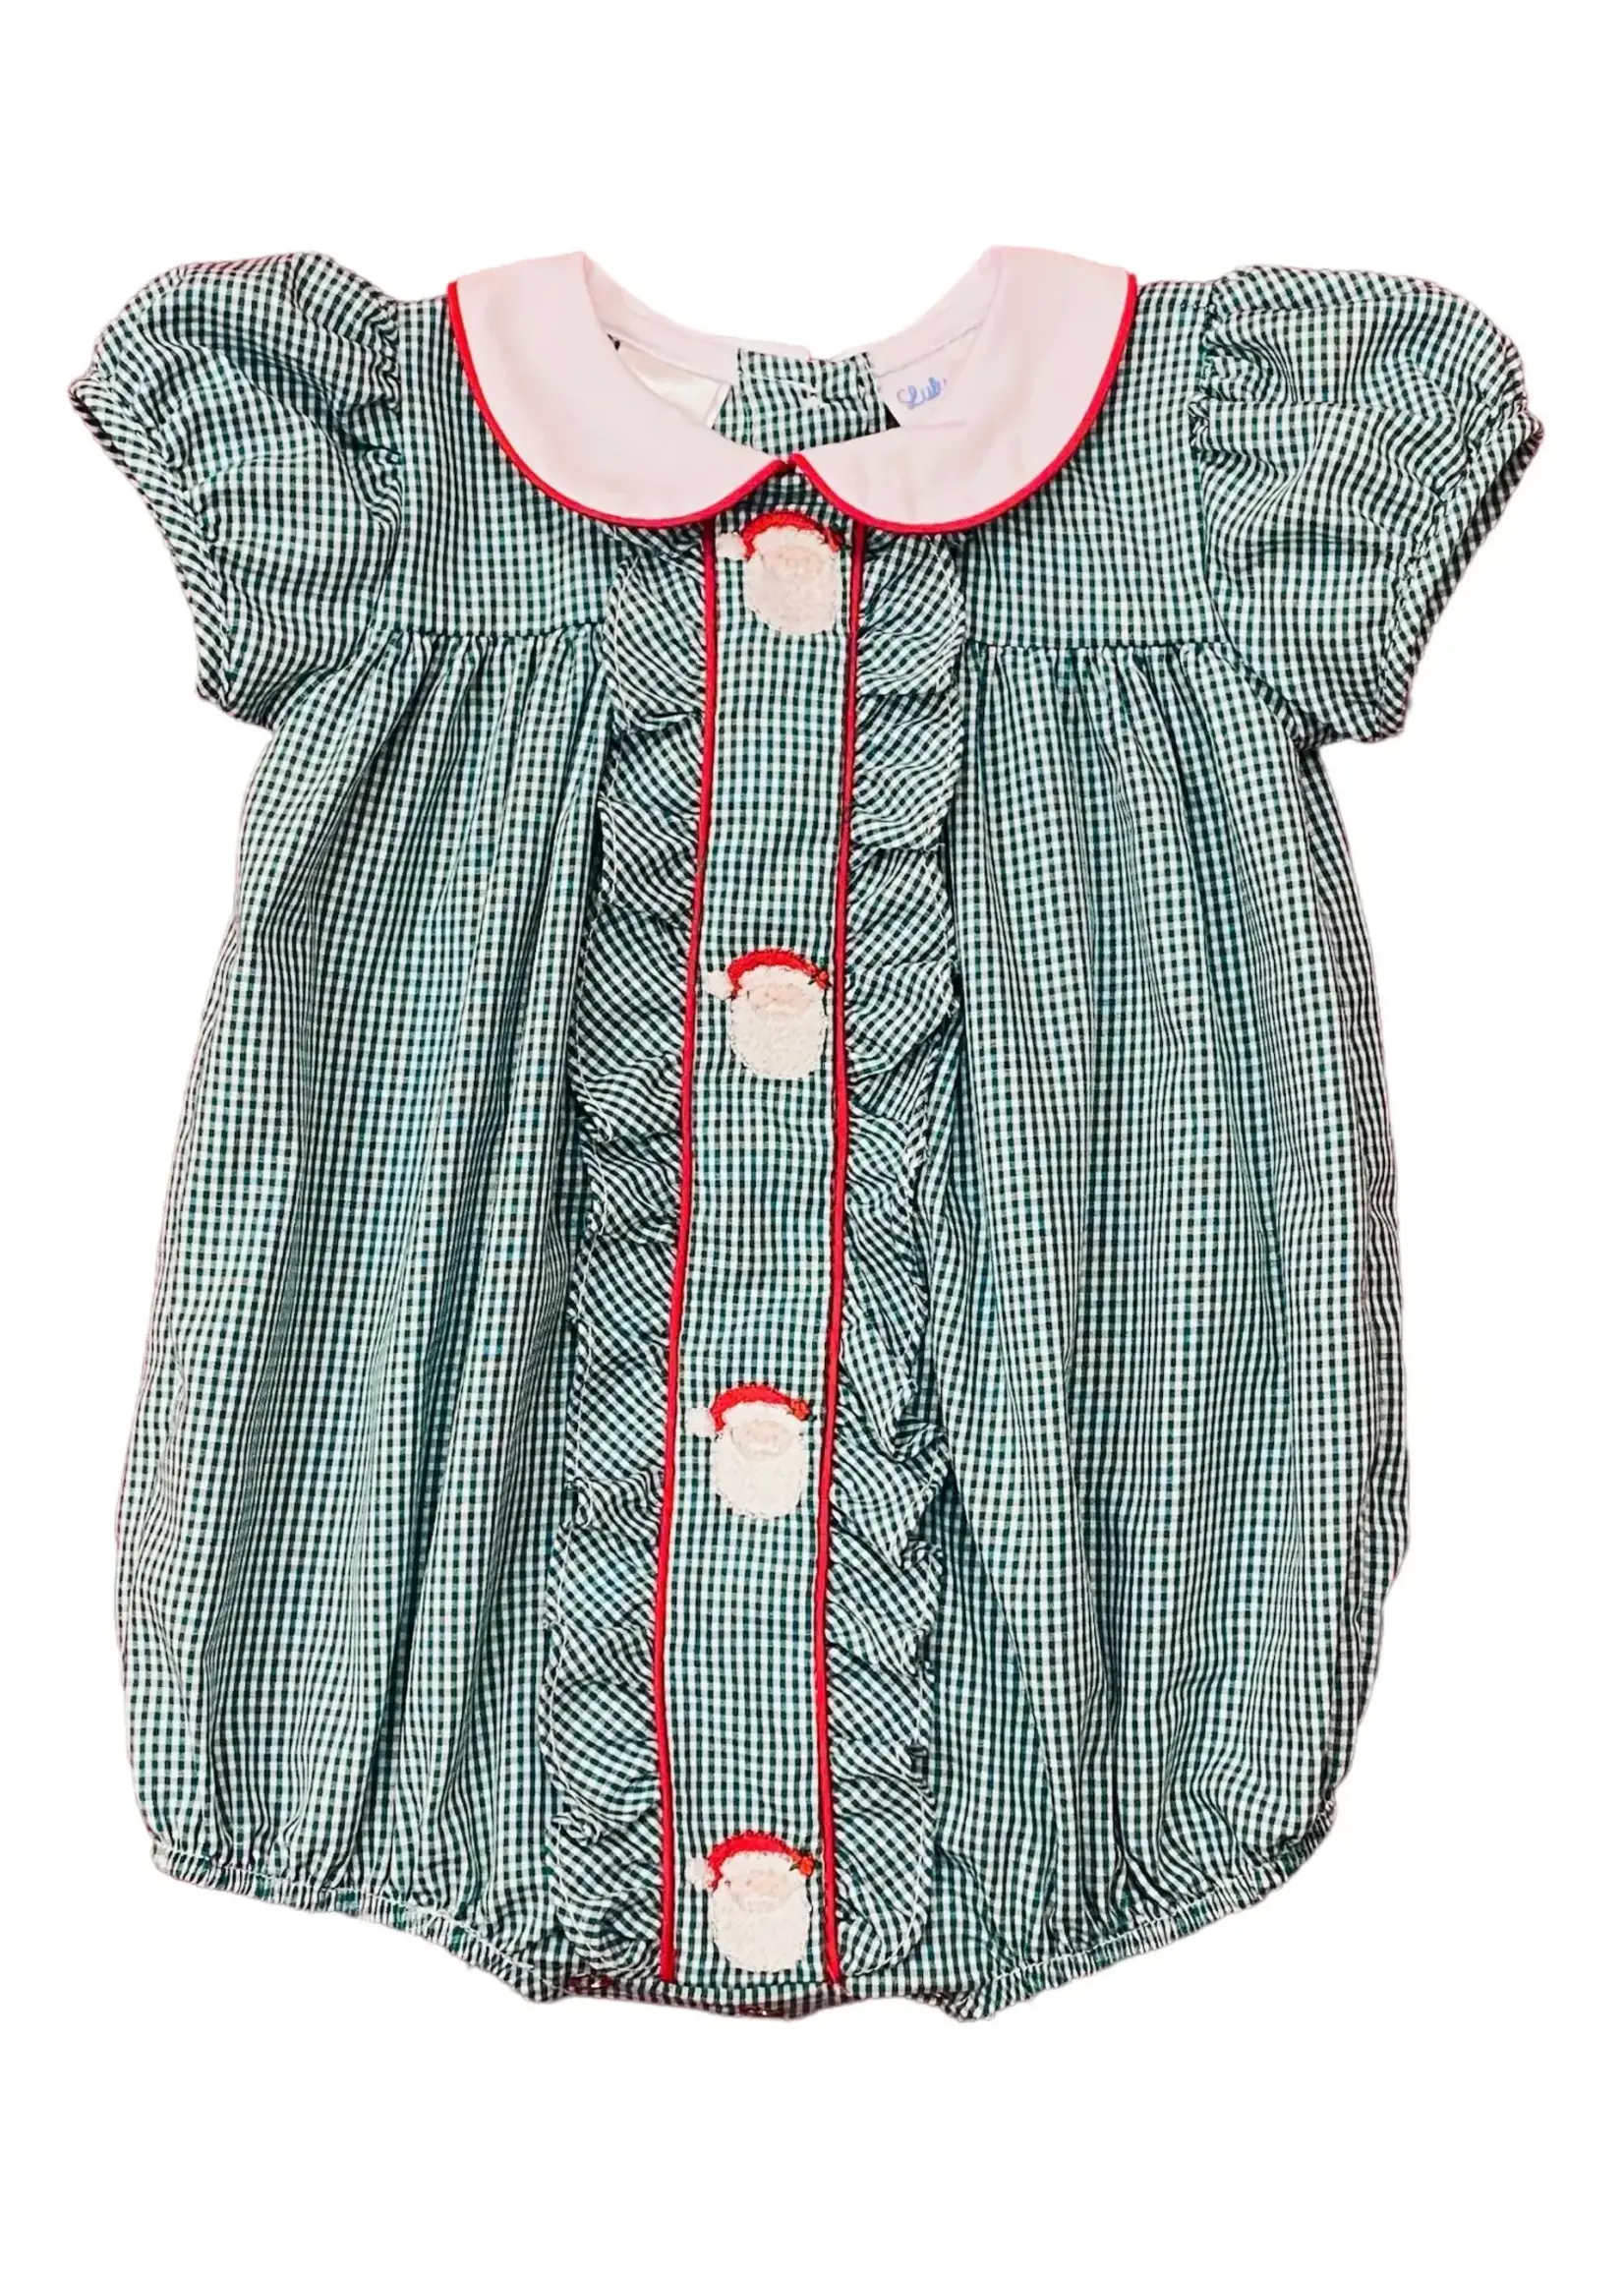 LuLu BeBe Milly Embroidered Bubble w/ Collar